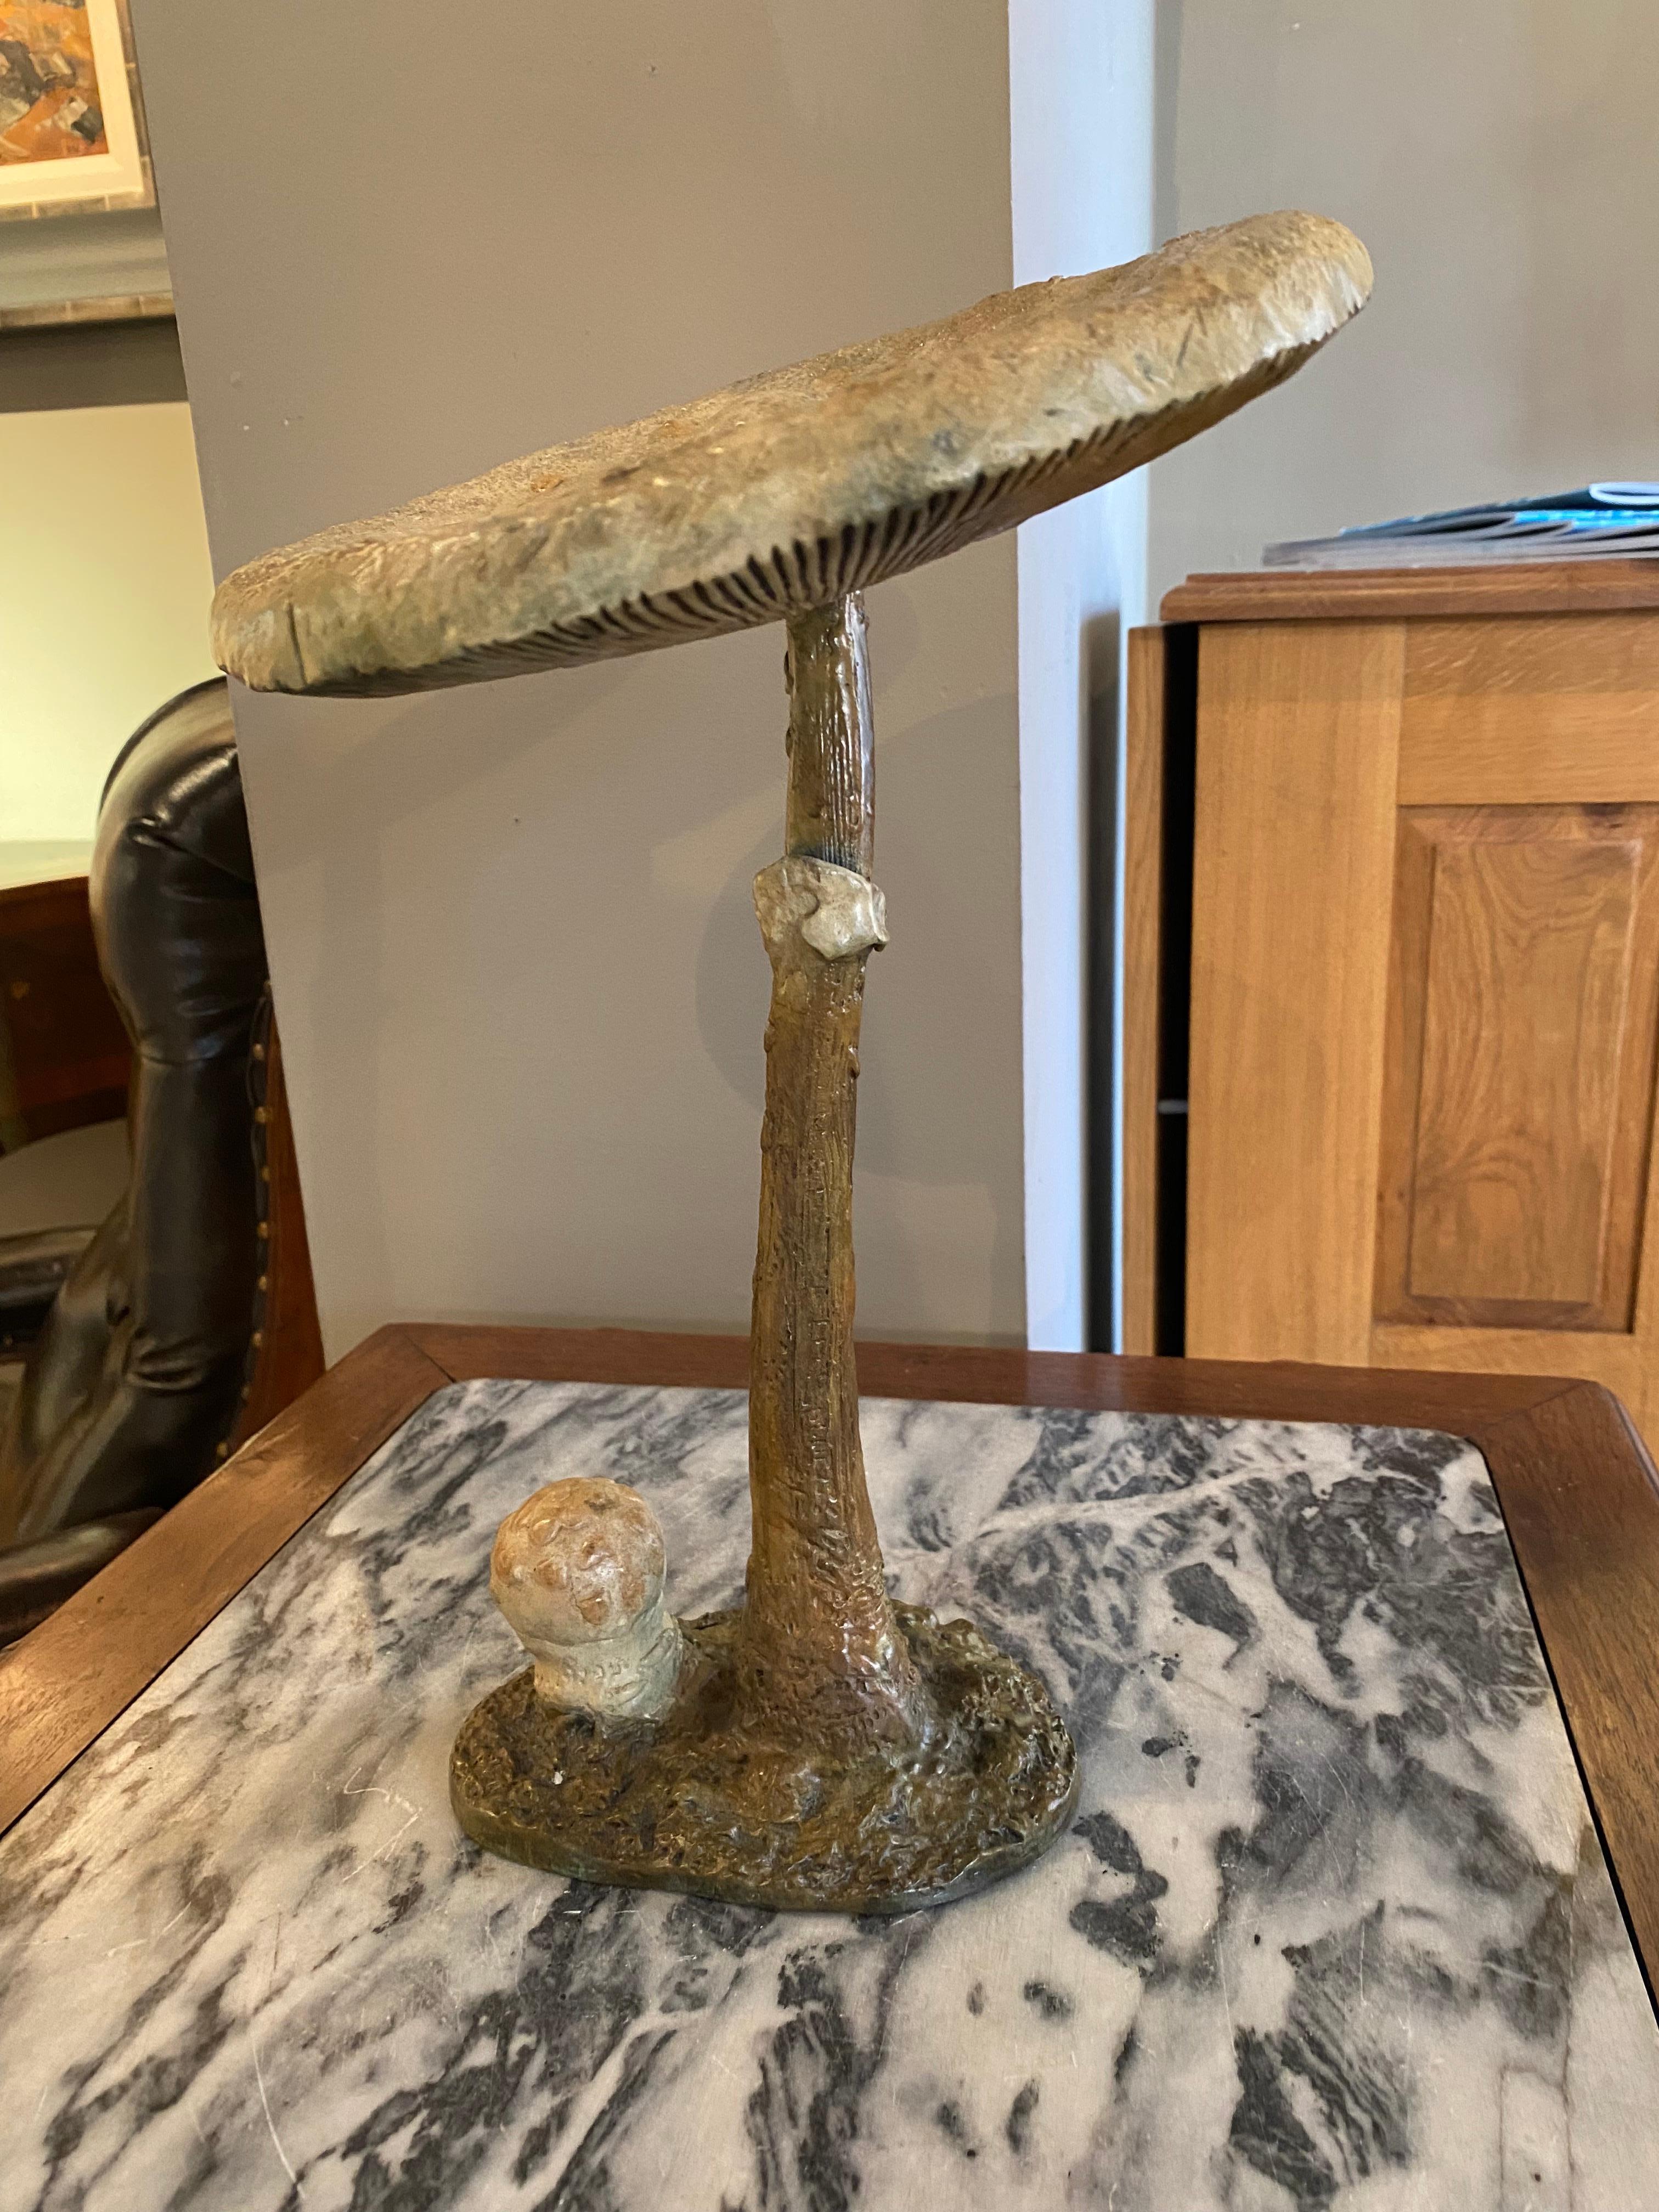 'Parasol Mushroom' is a stunningly elegant Bronze sculpture of a beautiful mushroom in the British countryside. Richard Smith conveys so much detail in such simple lines, exemplifying a truly wonderful talent. 

Richard Smith works as a part-time